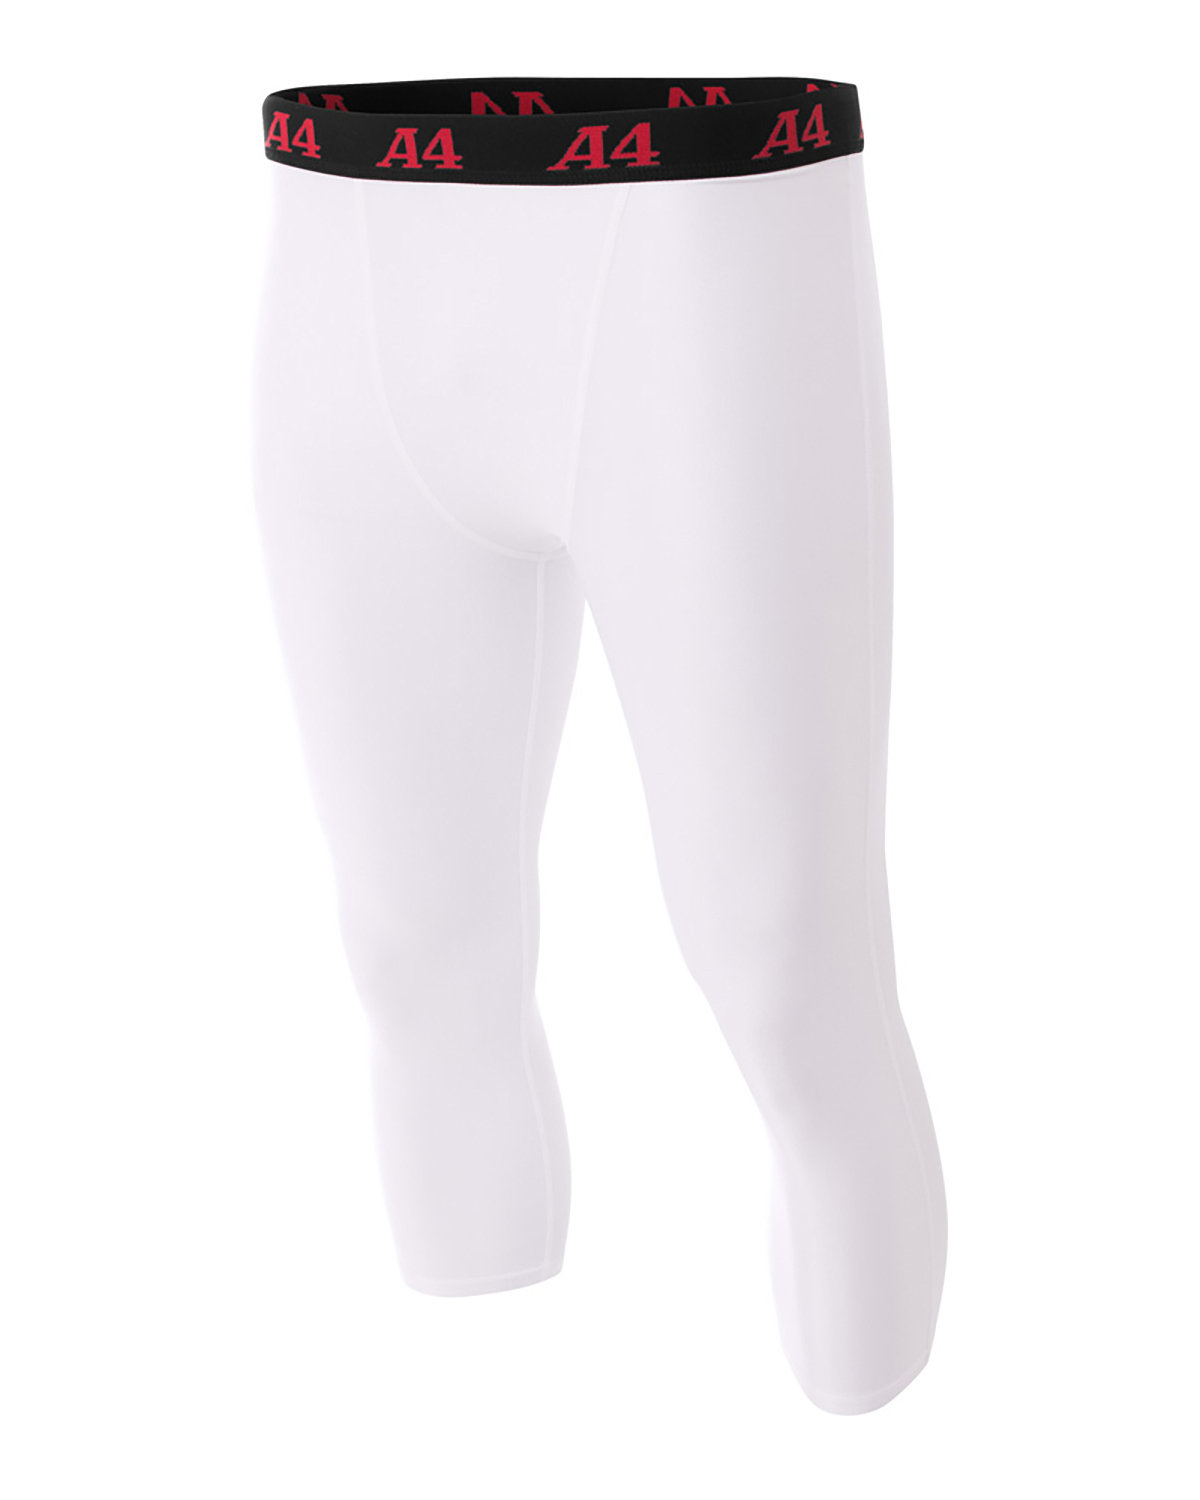 Adult Polyester/Spandex Compression Tight-A4